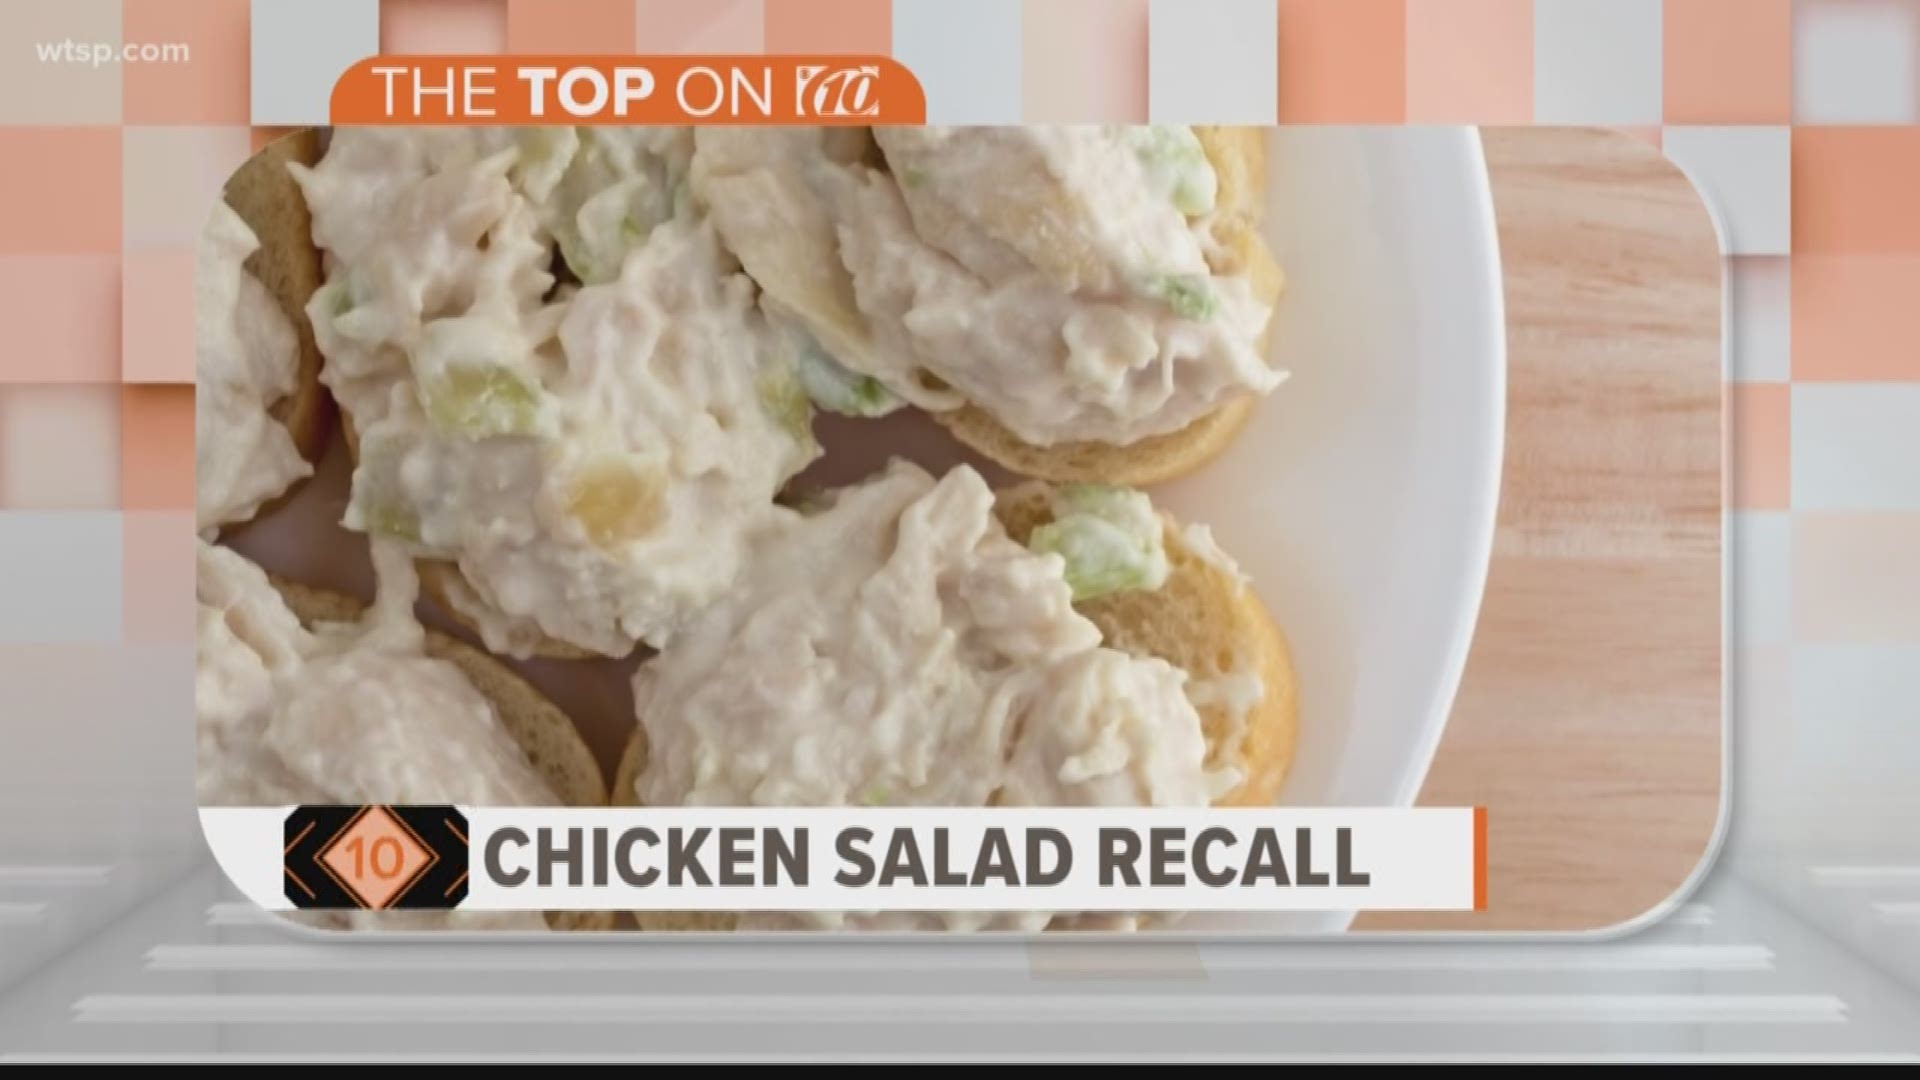 Lean Culinary Services, LLC is recalling about 223 pounds of ready-to-eat chicken salad products. on.wtsp.com/2T7XyuQ